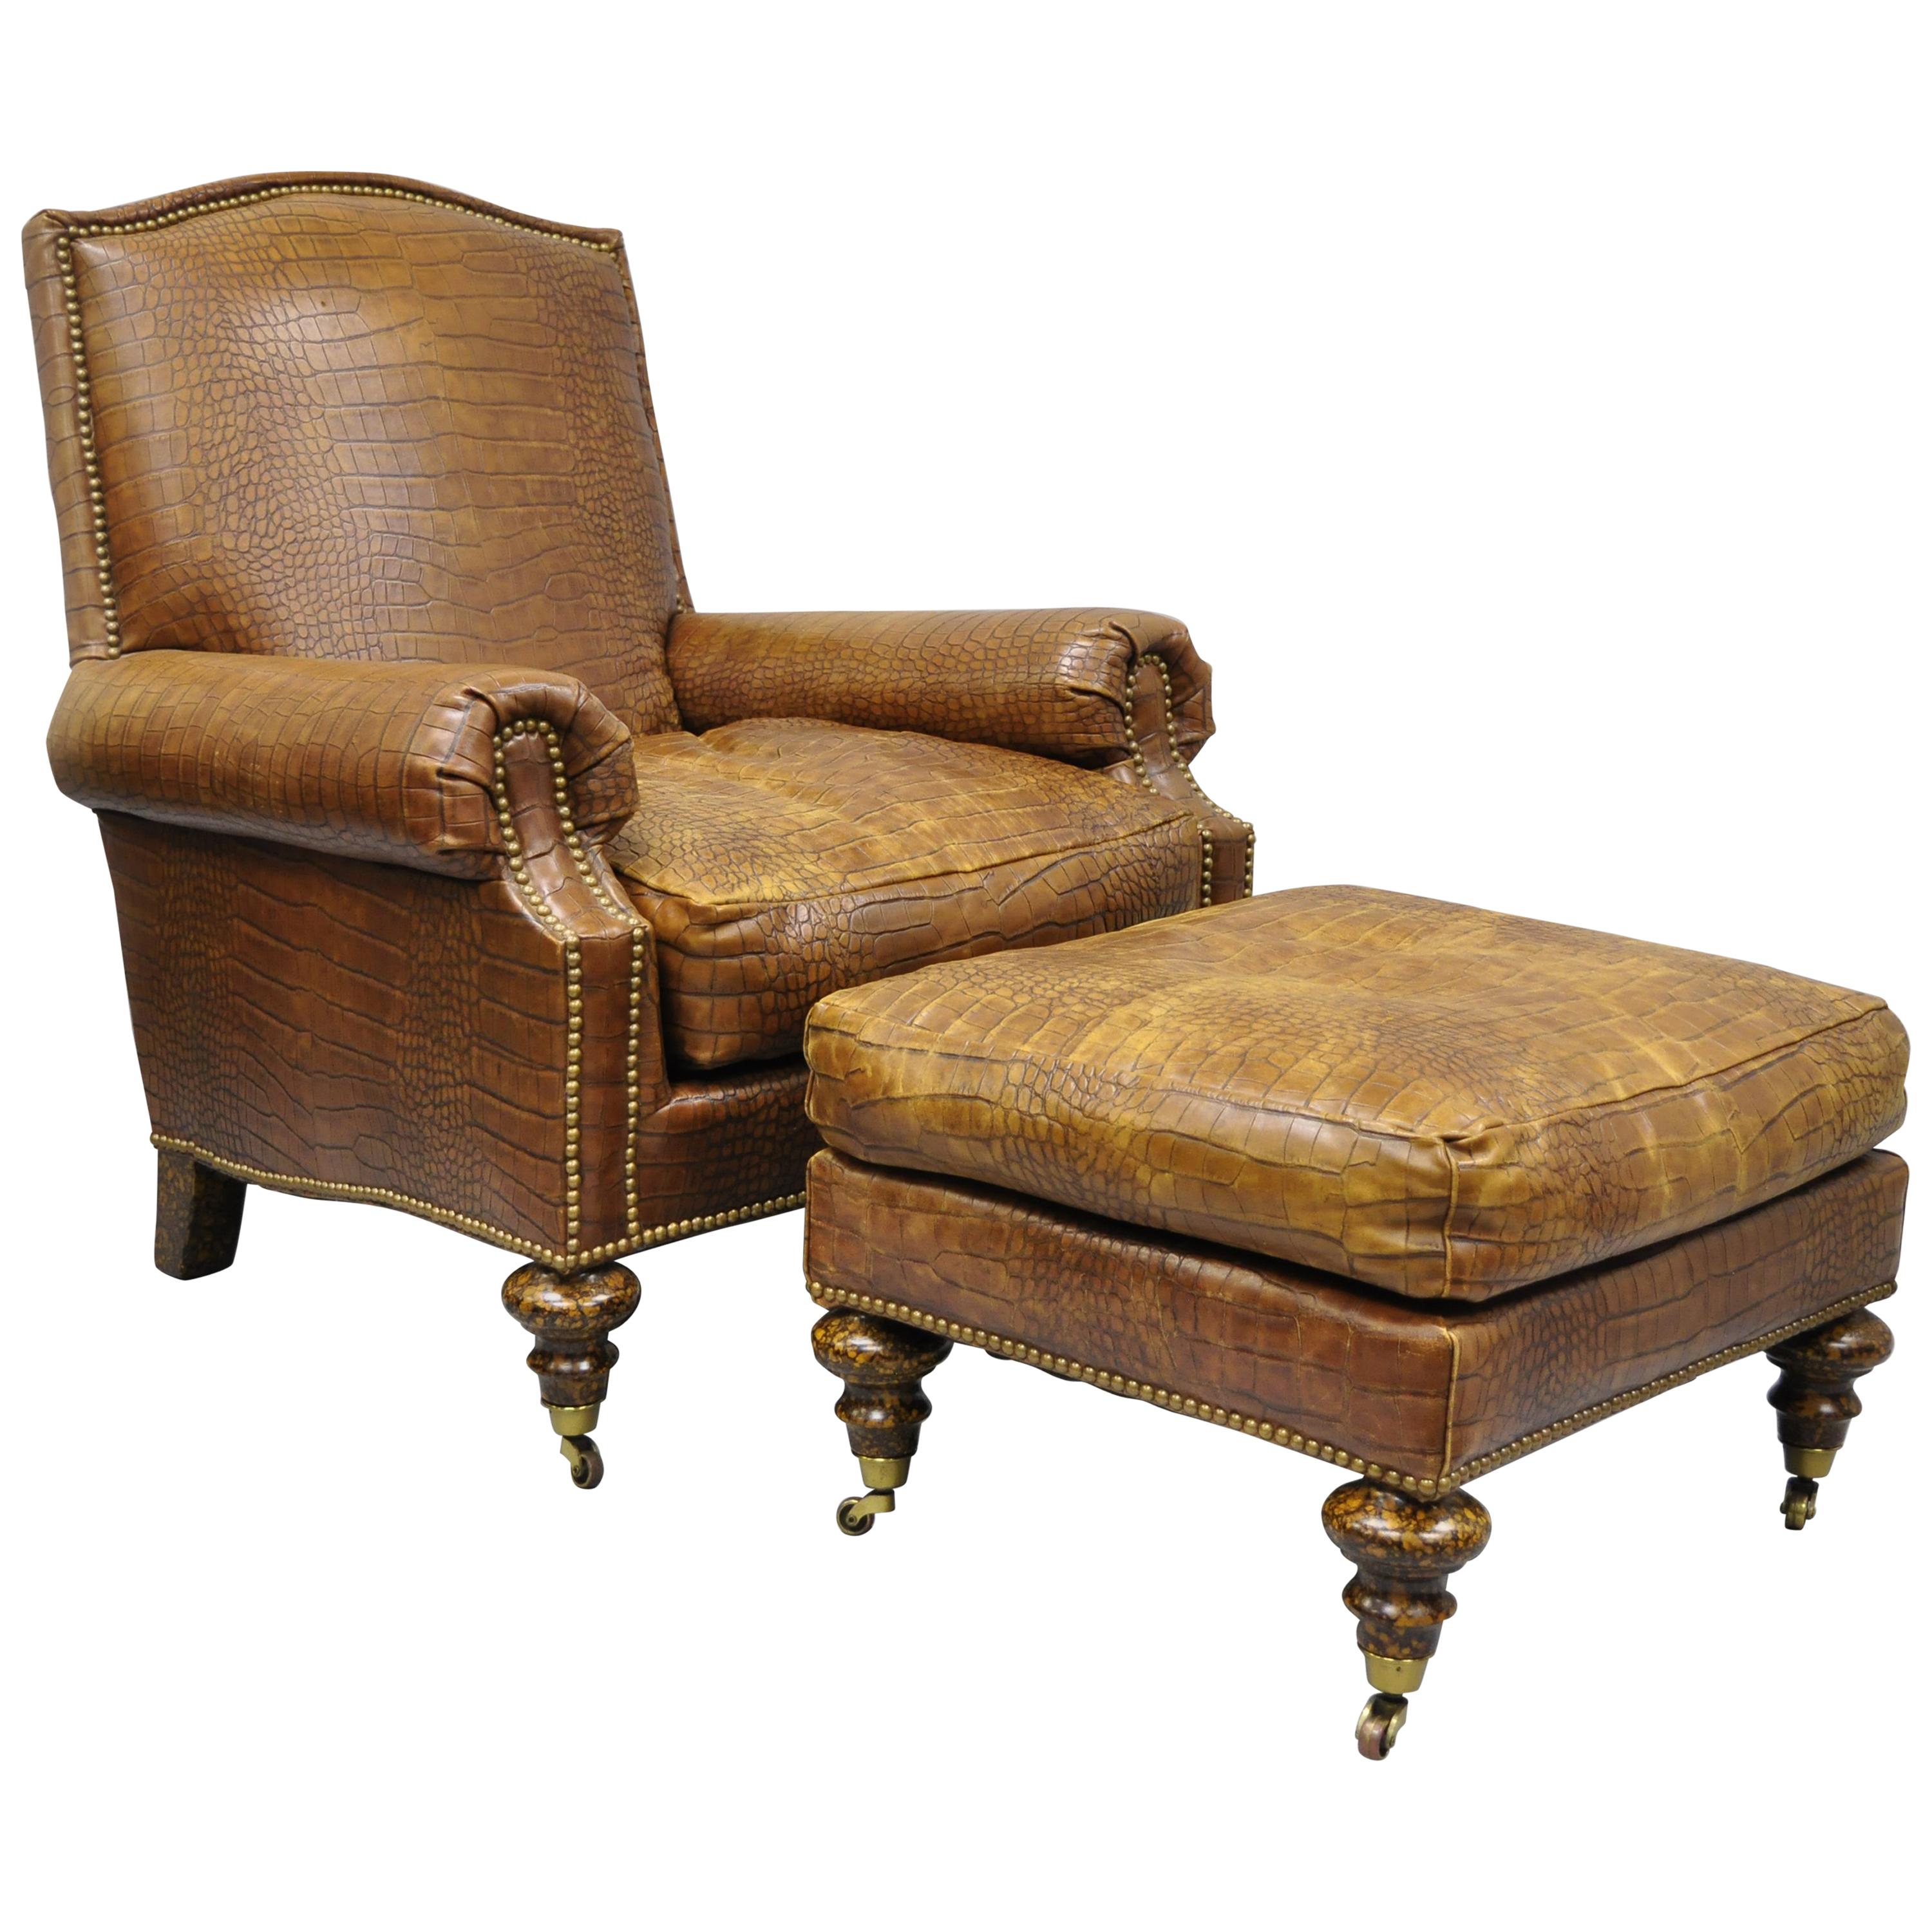 English Regency Brown Leather Gator Embossed Lounge Chair & Ottoman by Pearson